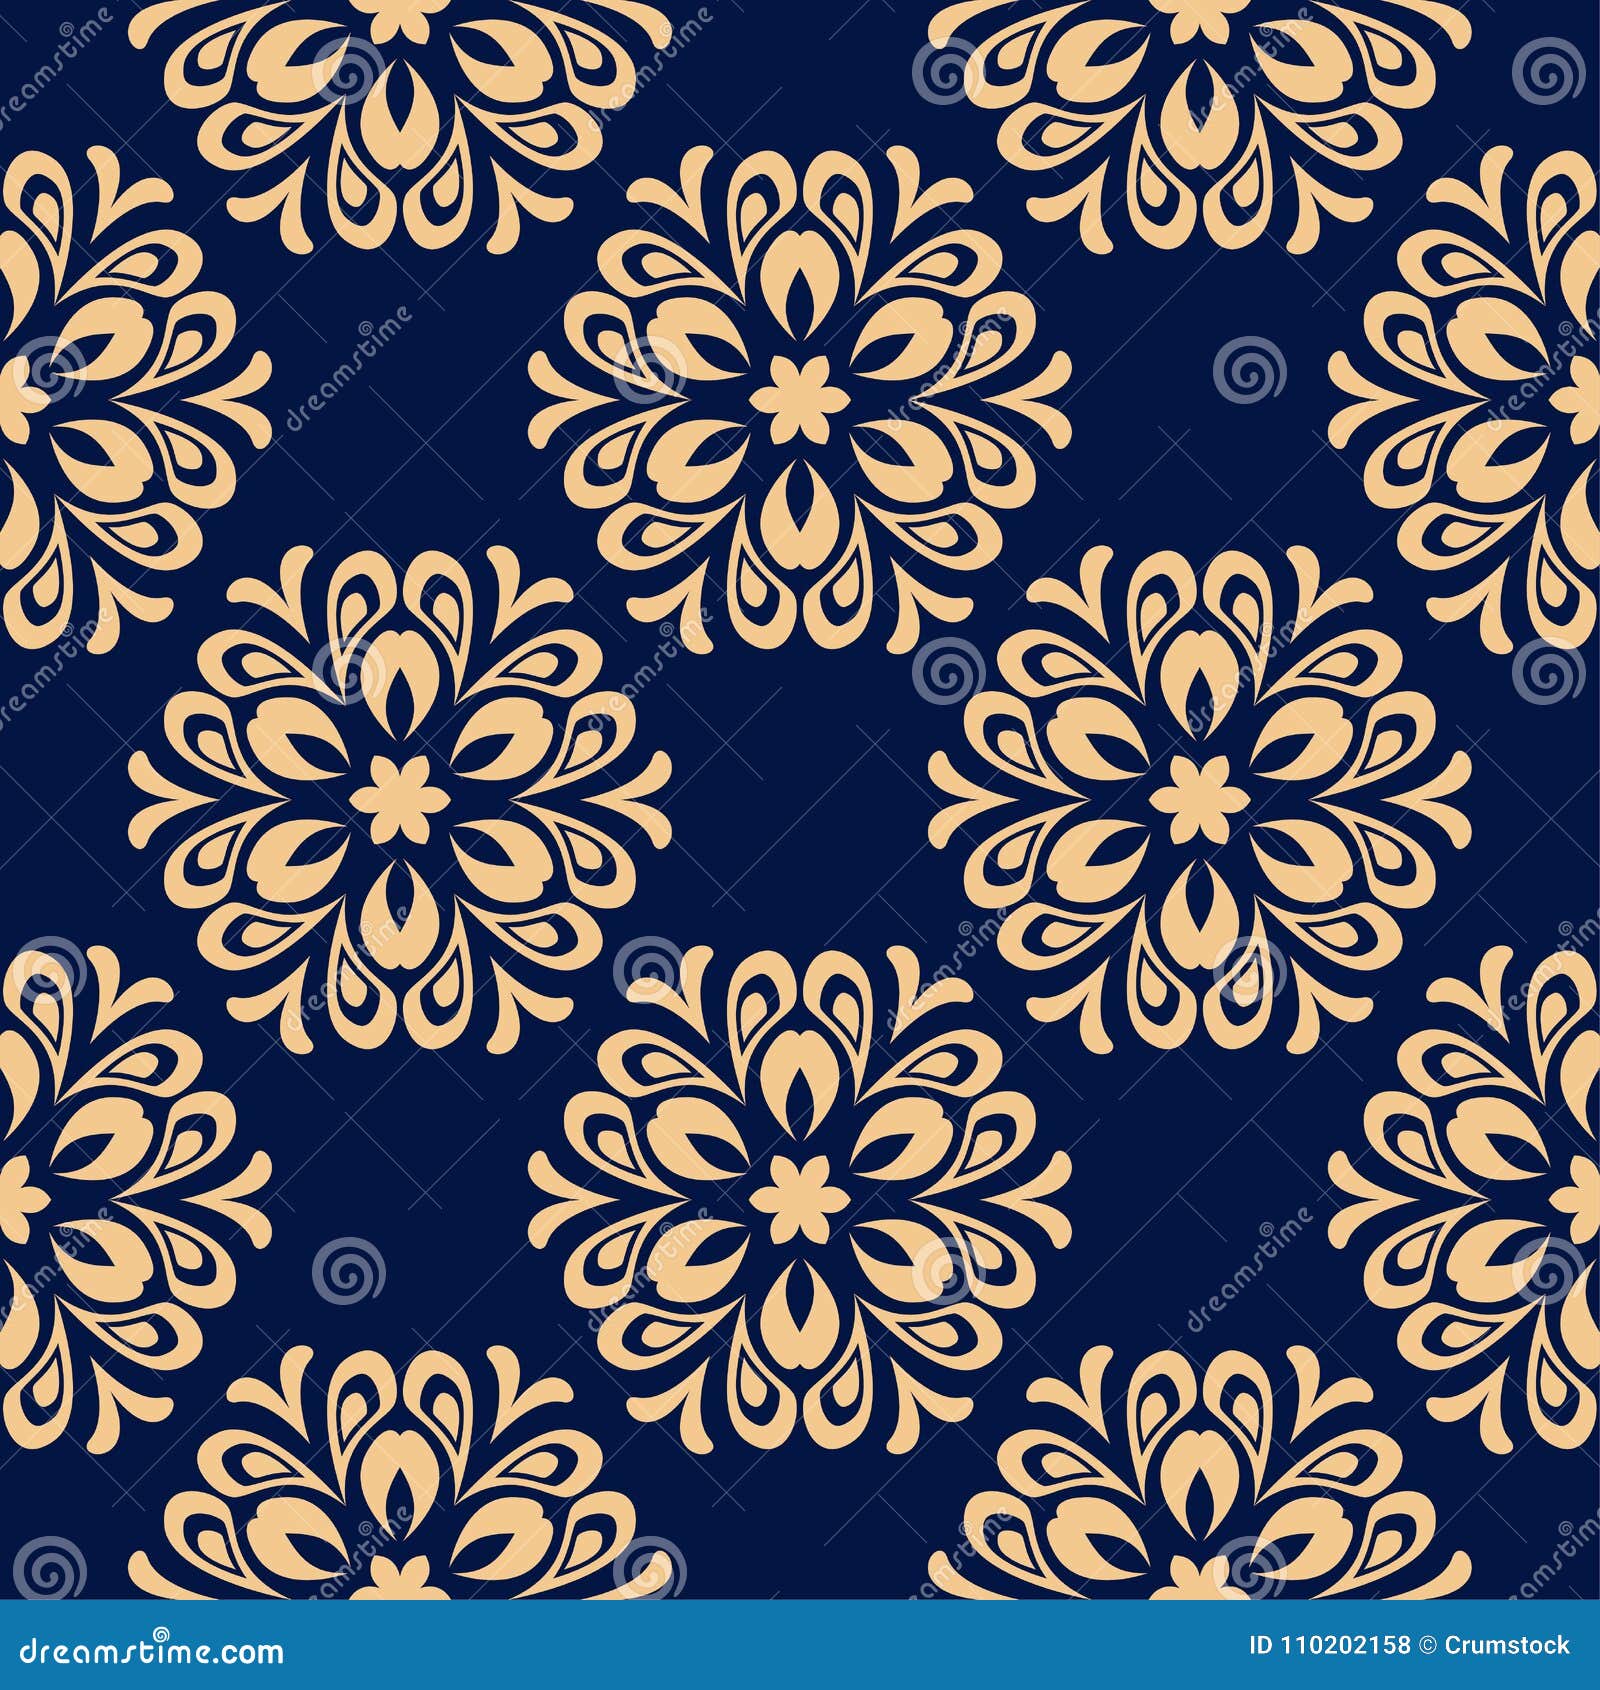 Golden Floral Seamless Pattern on Blue Background Stock Vector ...